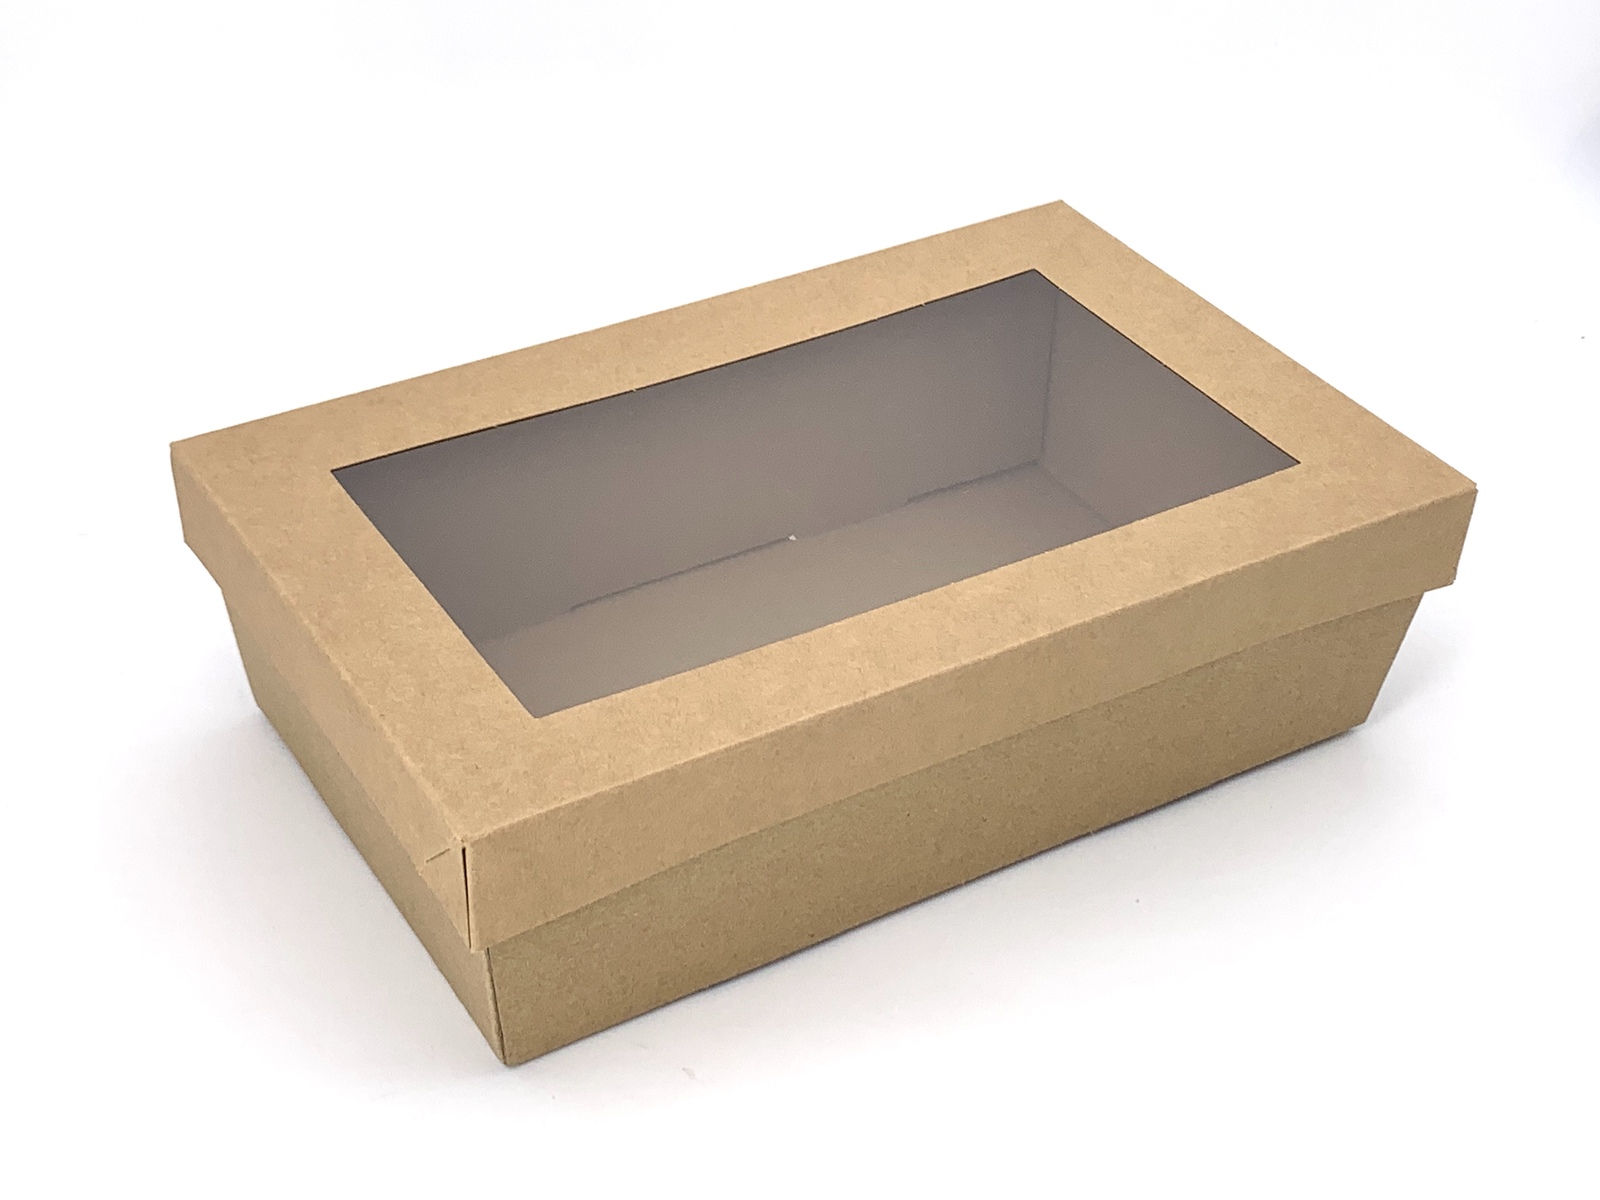 SAMPLE - Brown Catering Tray - Small with Lids